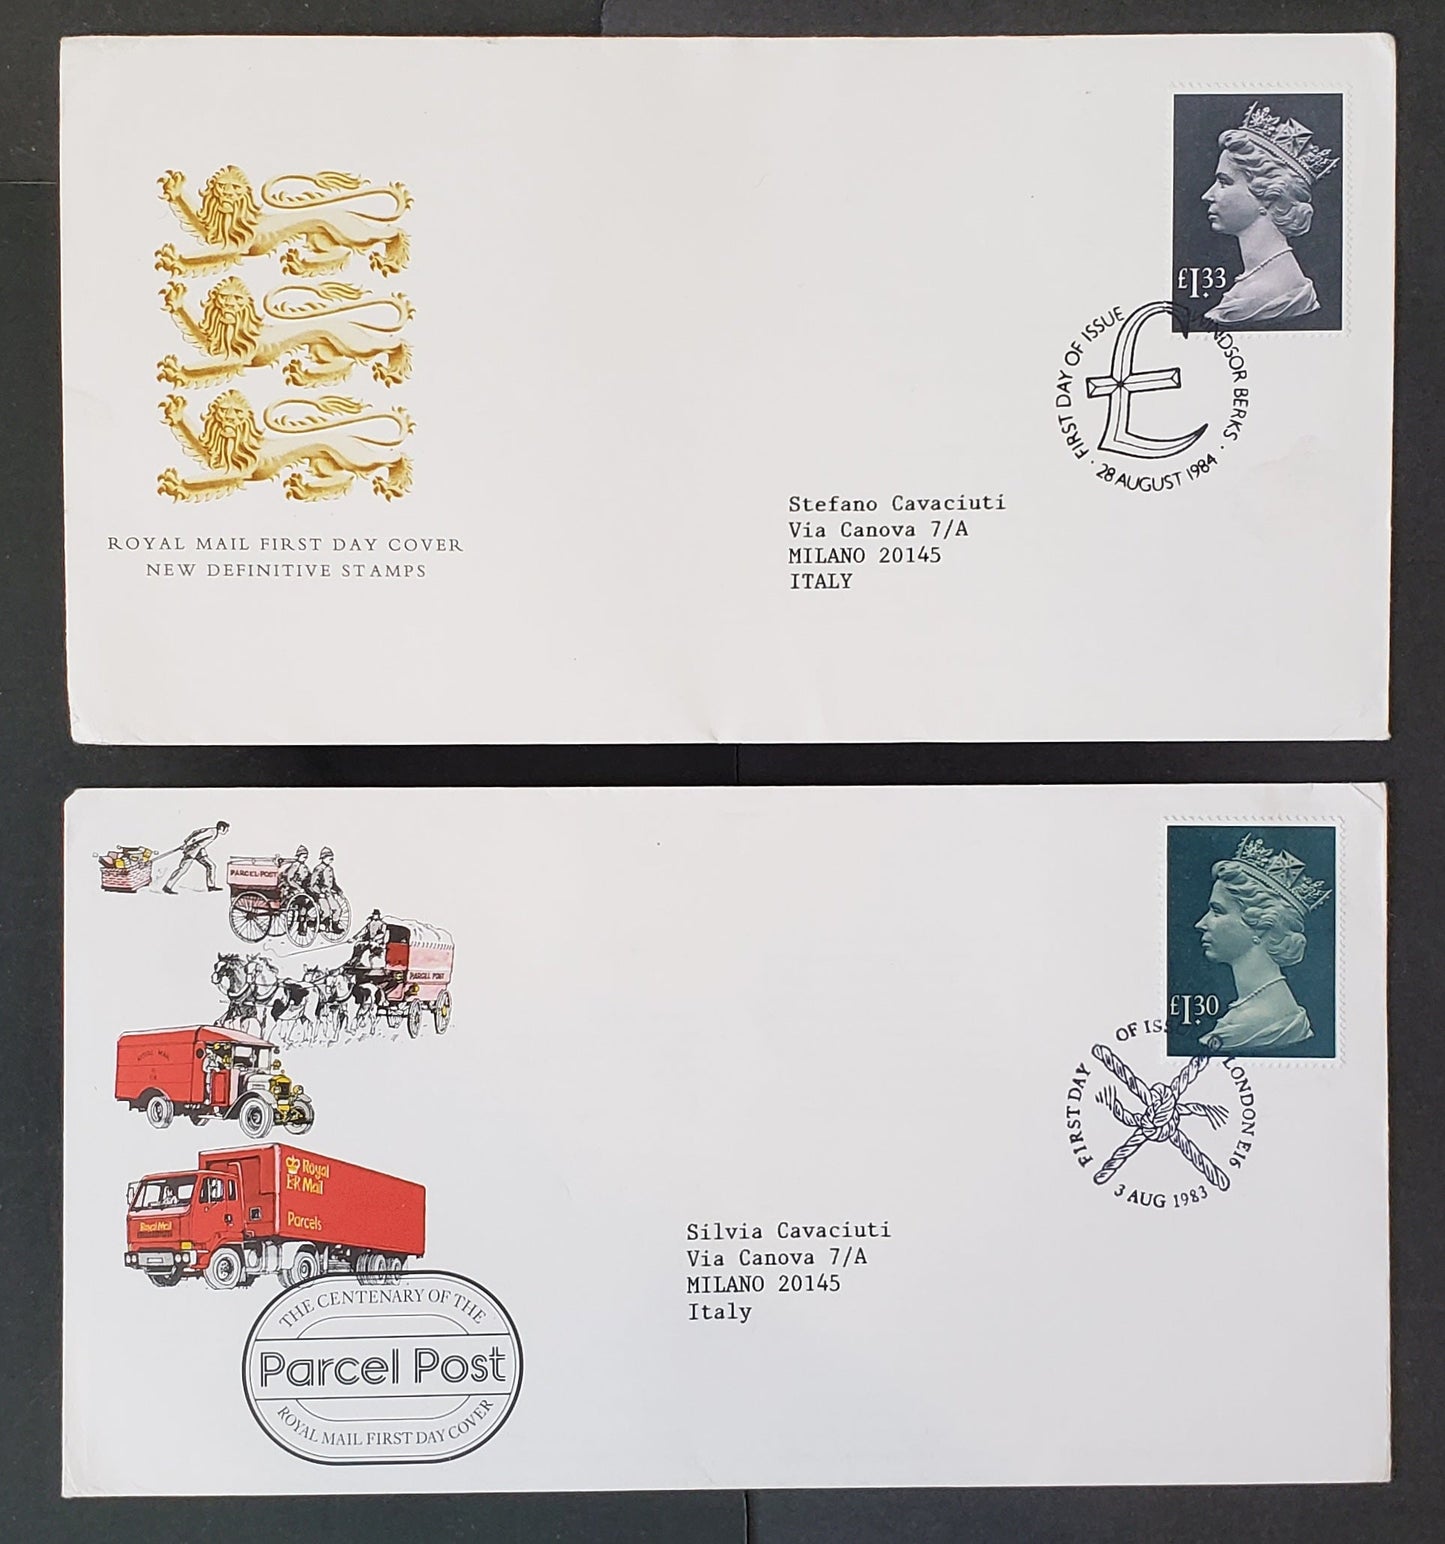 Lot 373 Great Britain 1983-1984 1.30-1.33 GBP High Value Machin Defintive First Day Covers, 2 Different, 2018 Gibbons Concise Converted Cat. $24.75